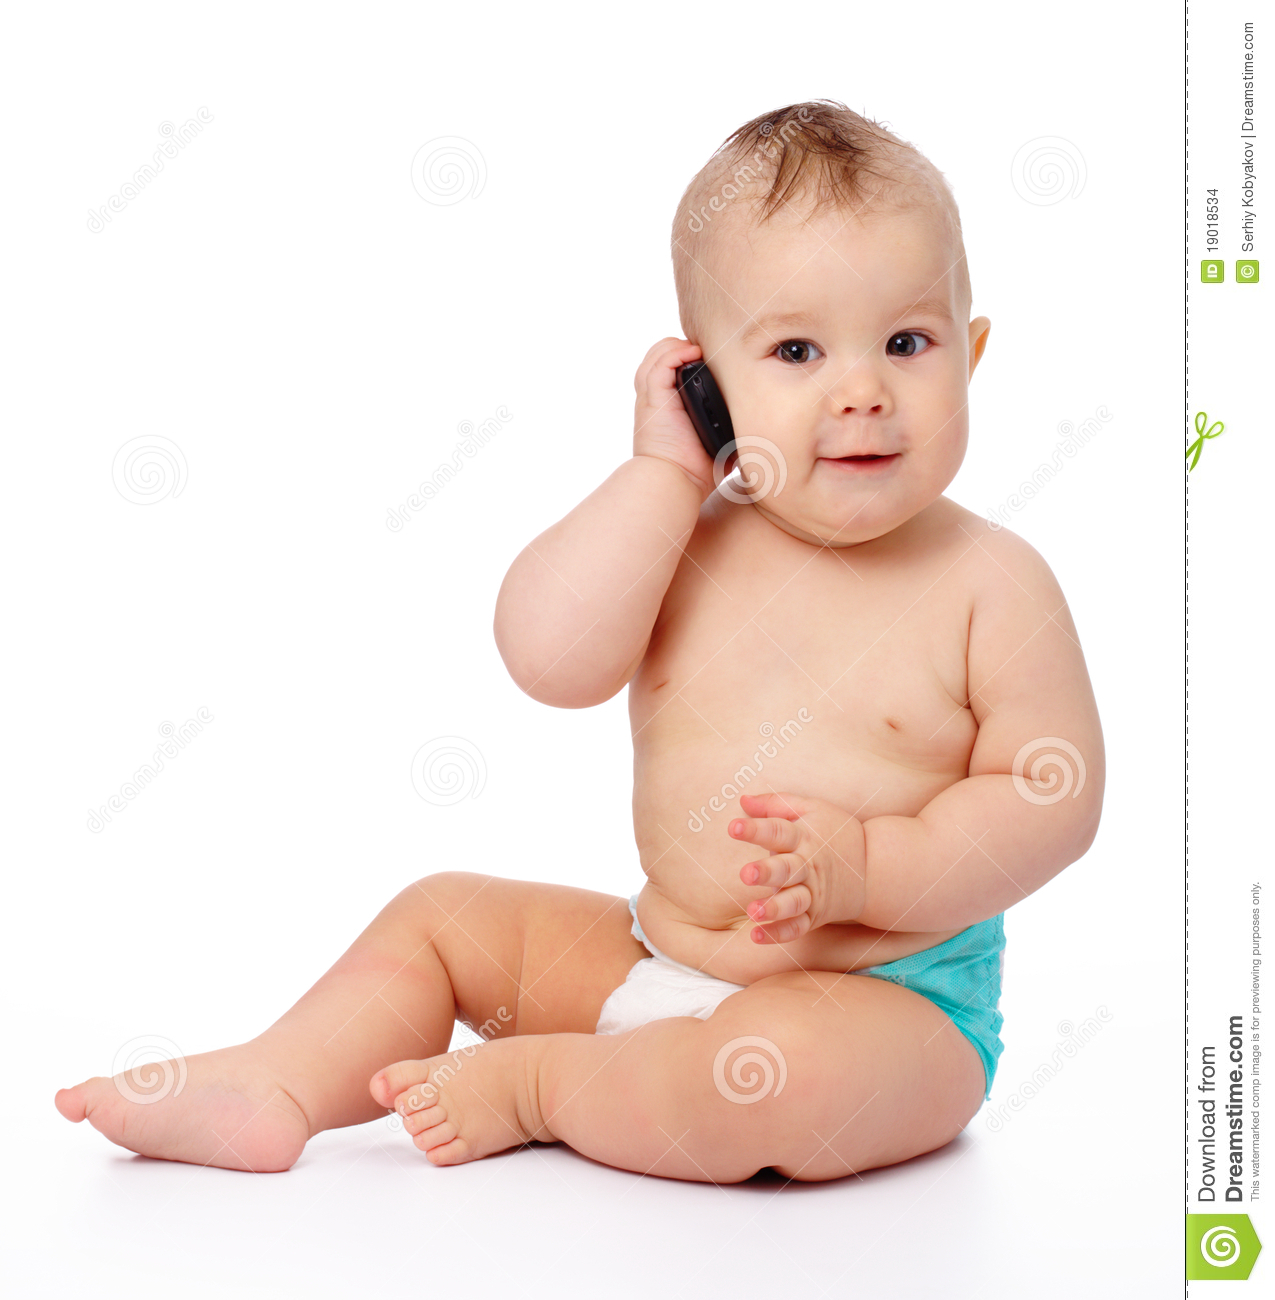 Cute Little Baby Is Talking On Cell Phone Stock Images   Image